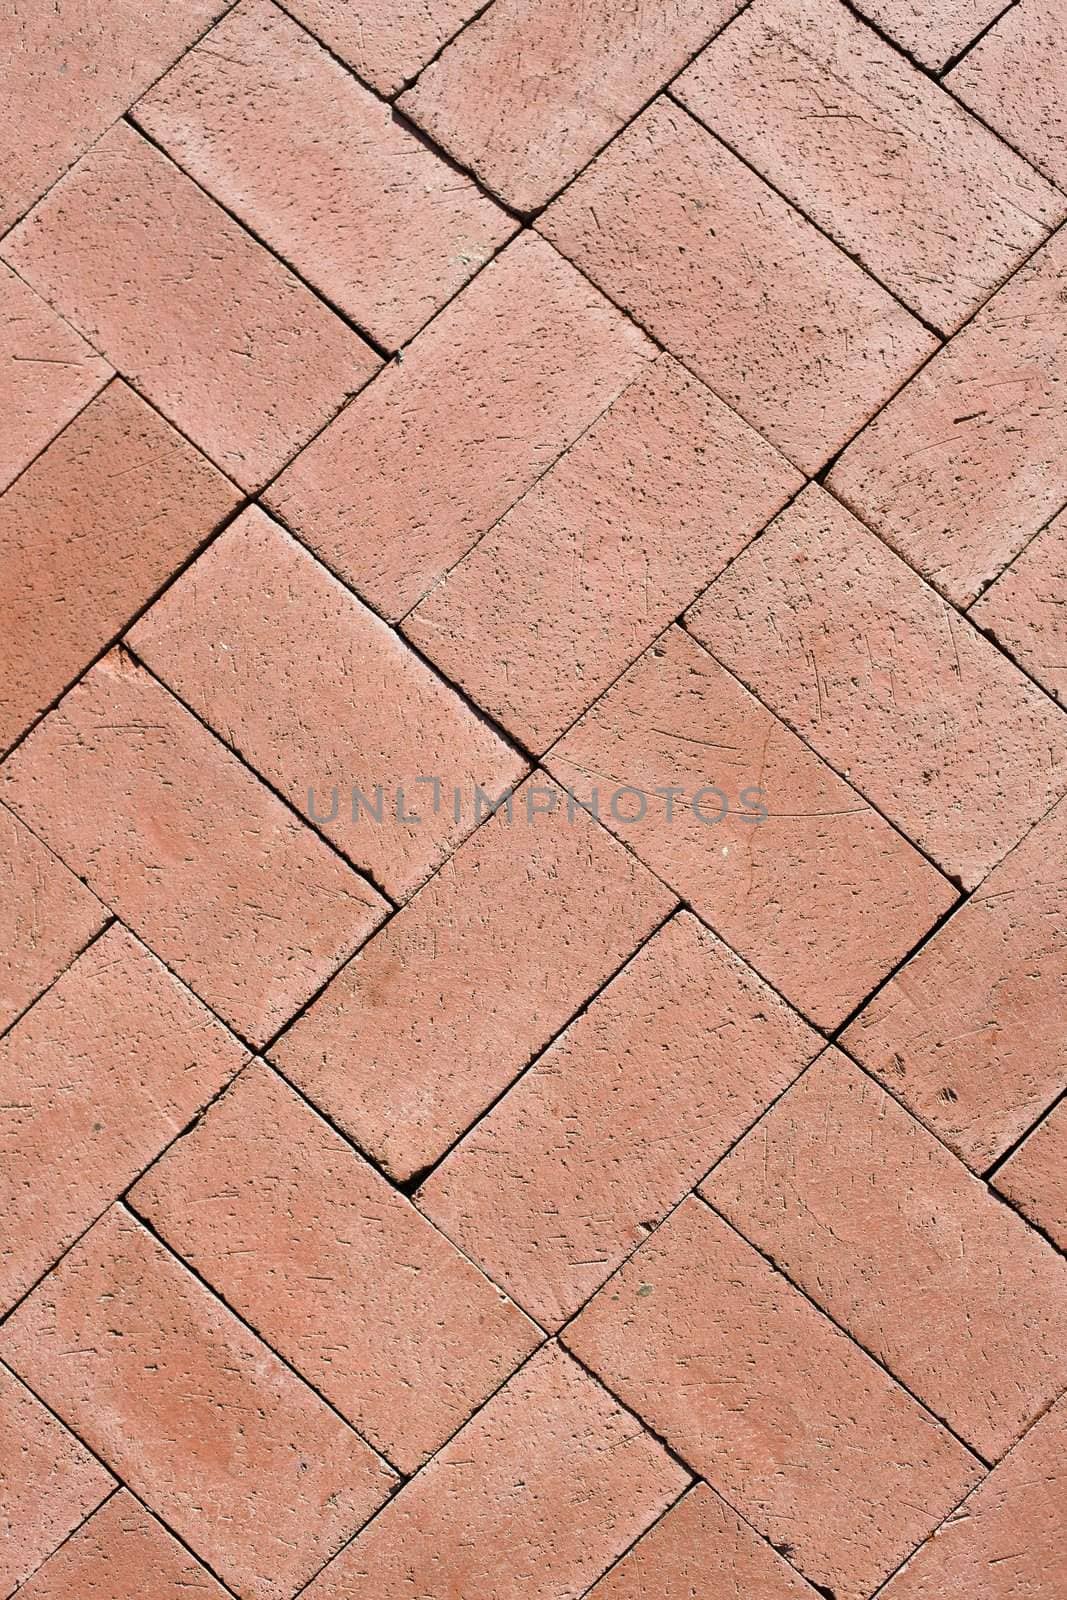 Brick Pattern by ptimages